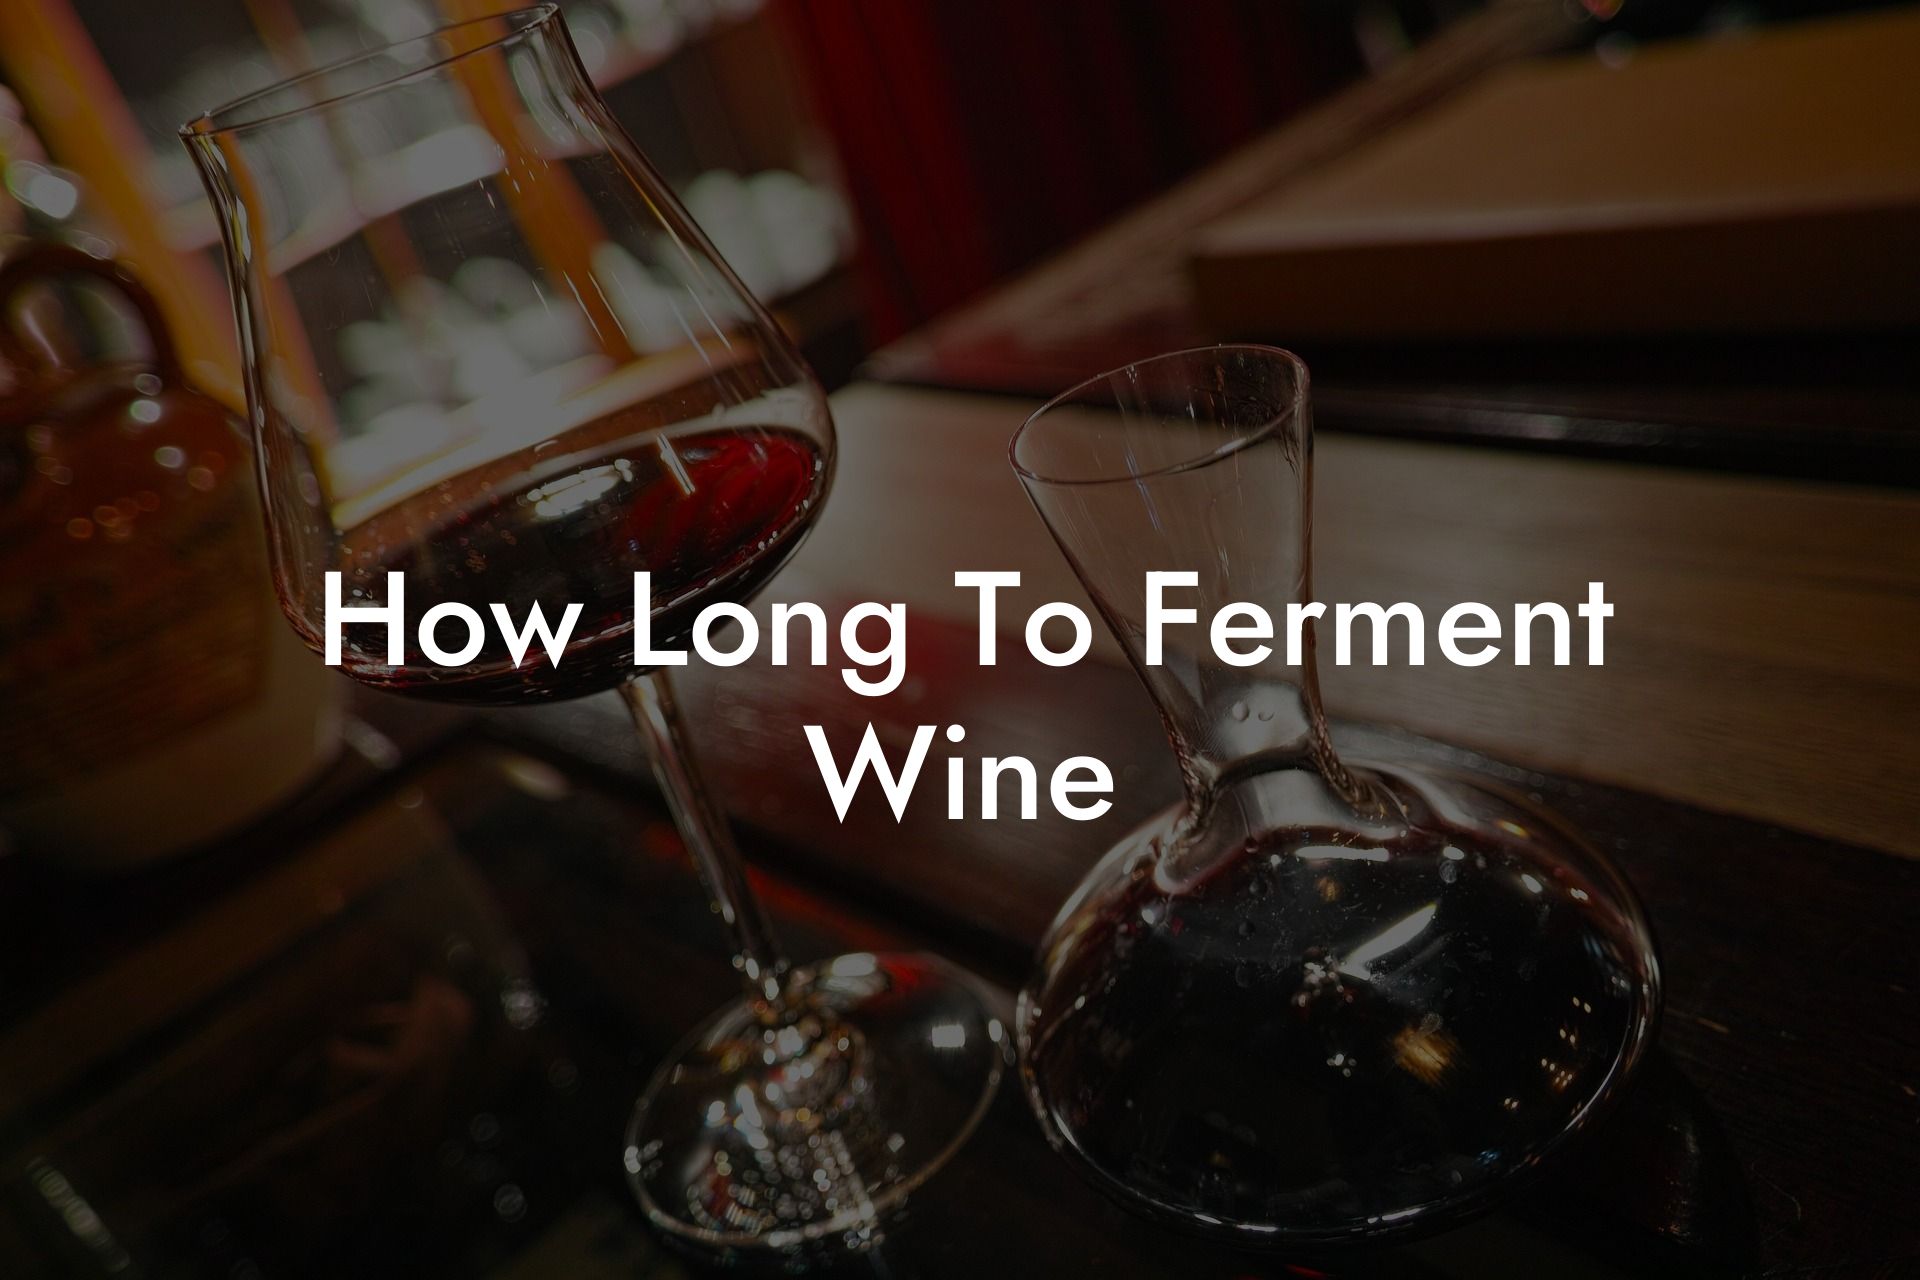 How Long To Ferment Wine